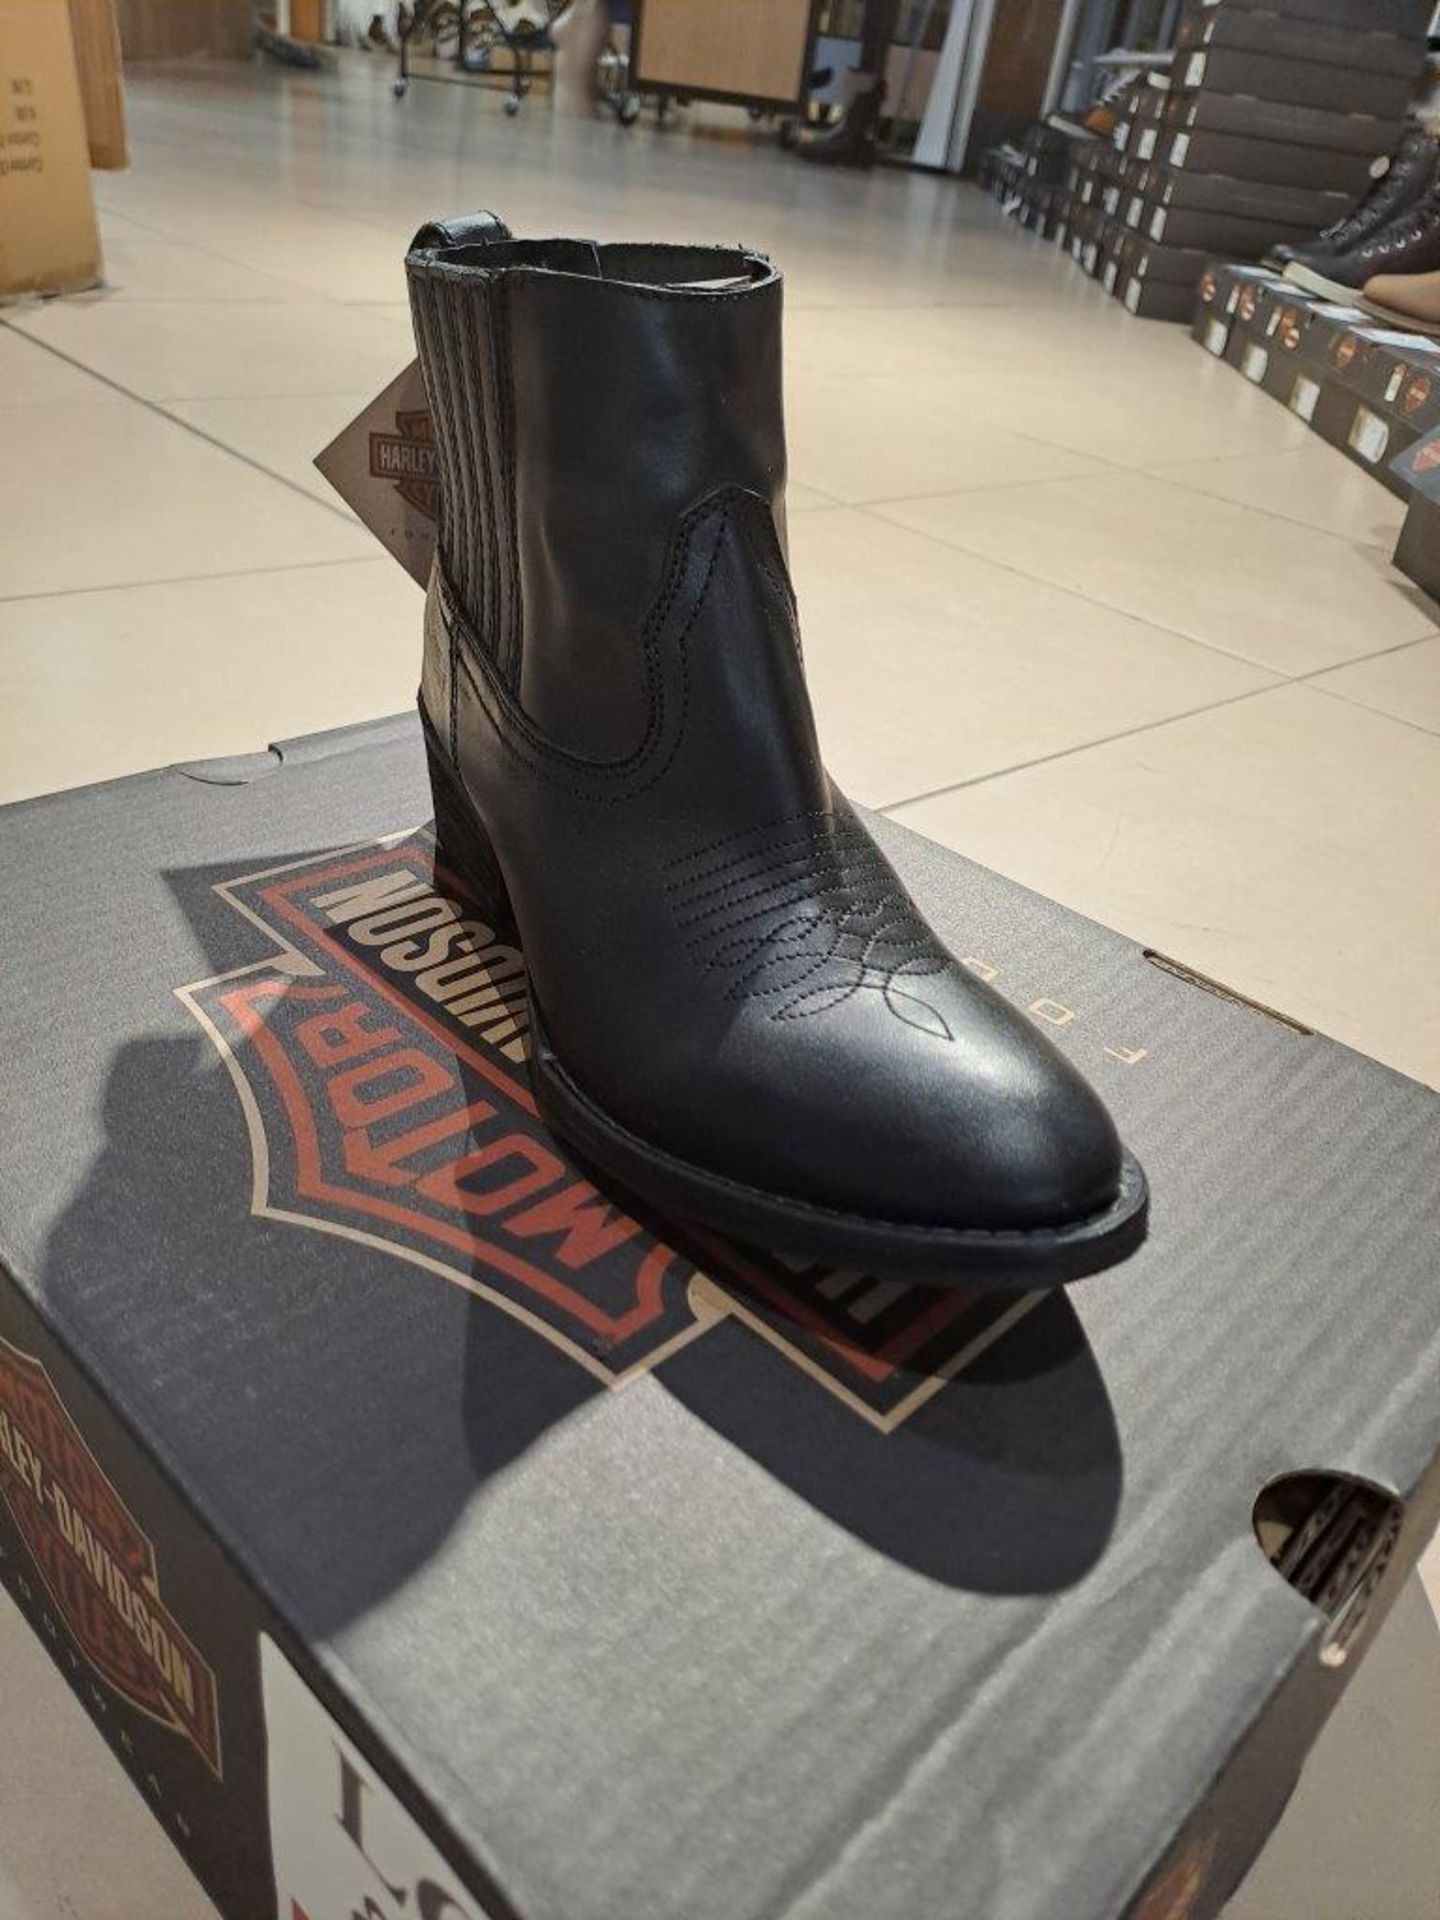 Harley Davidson Curwood Size 7 Womens Boots